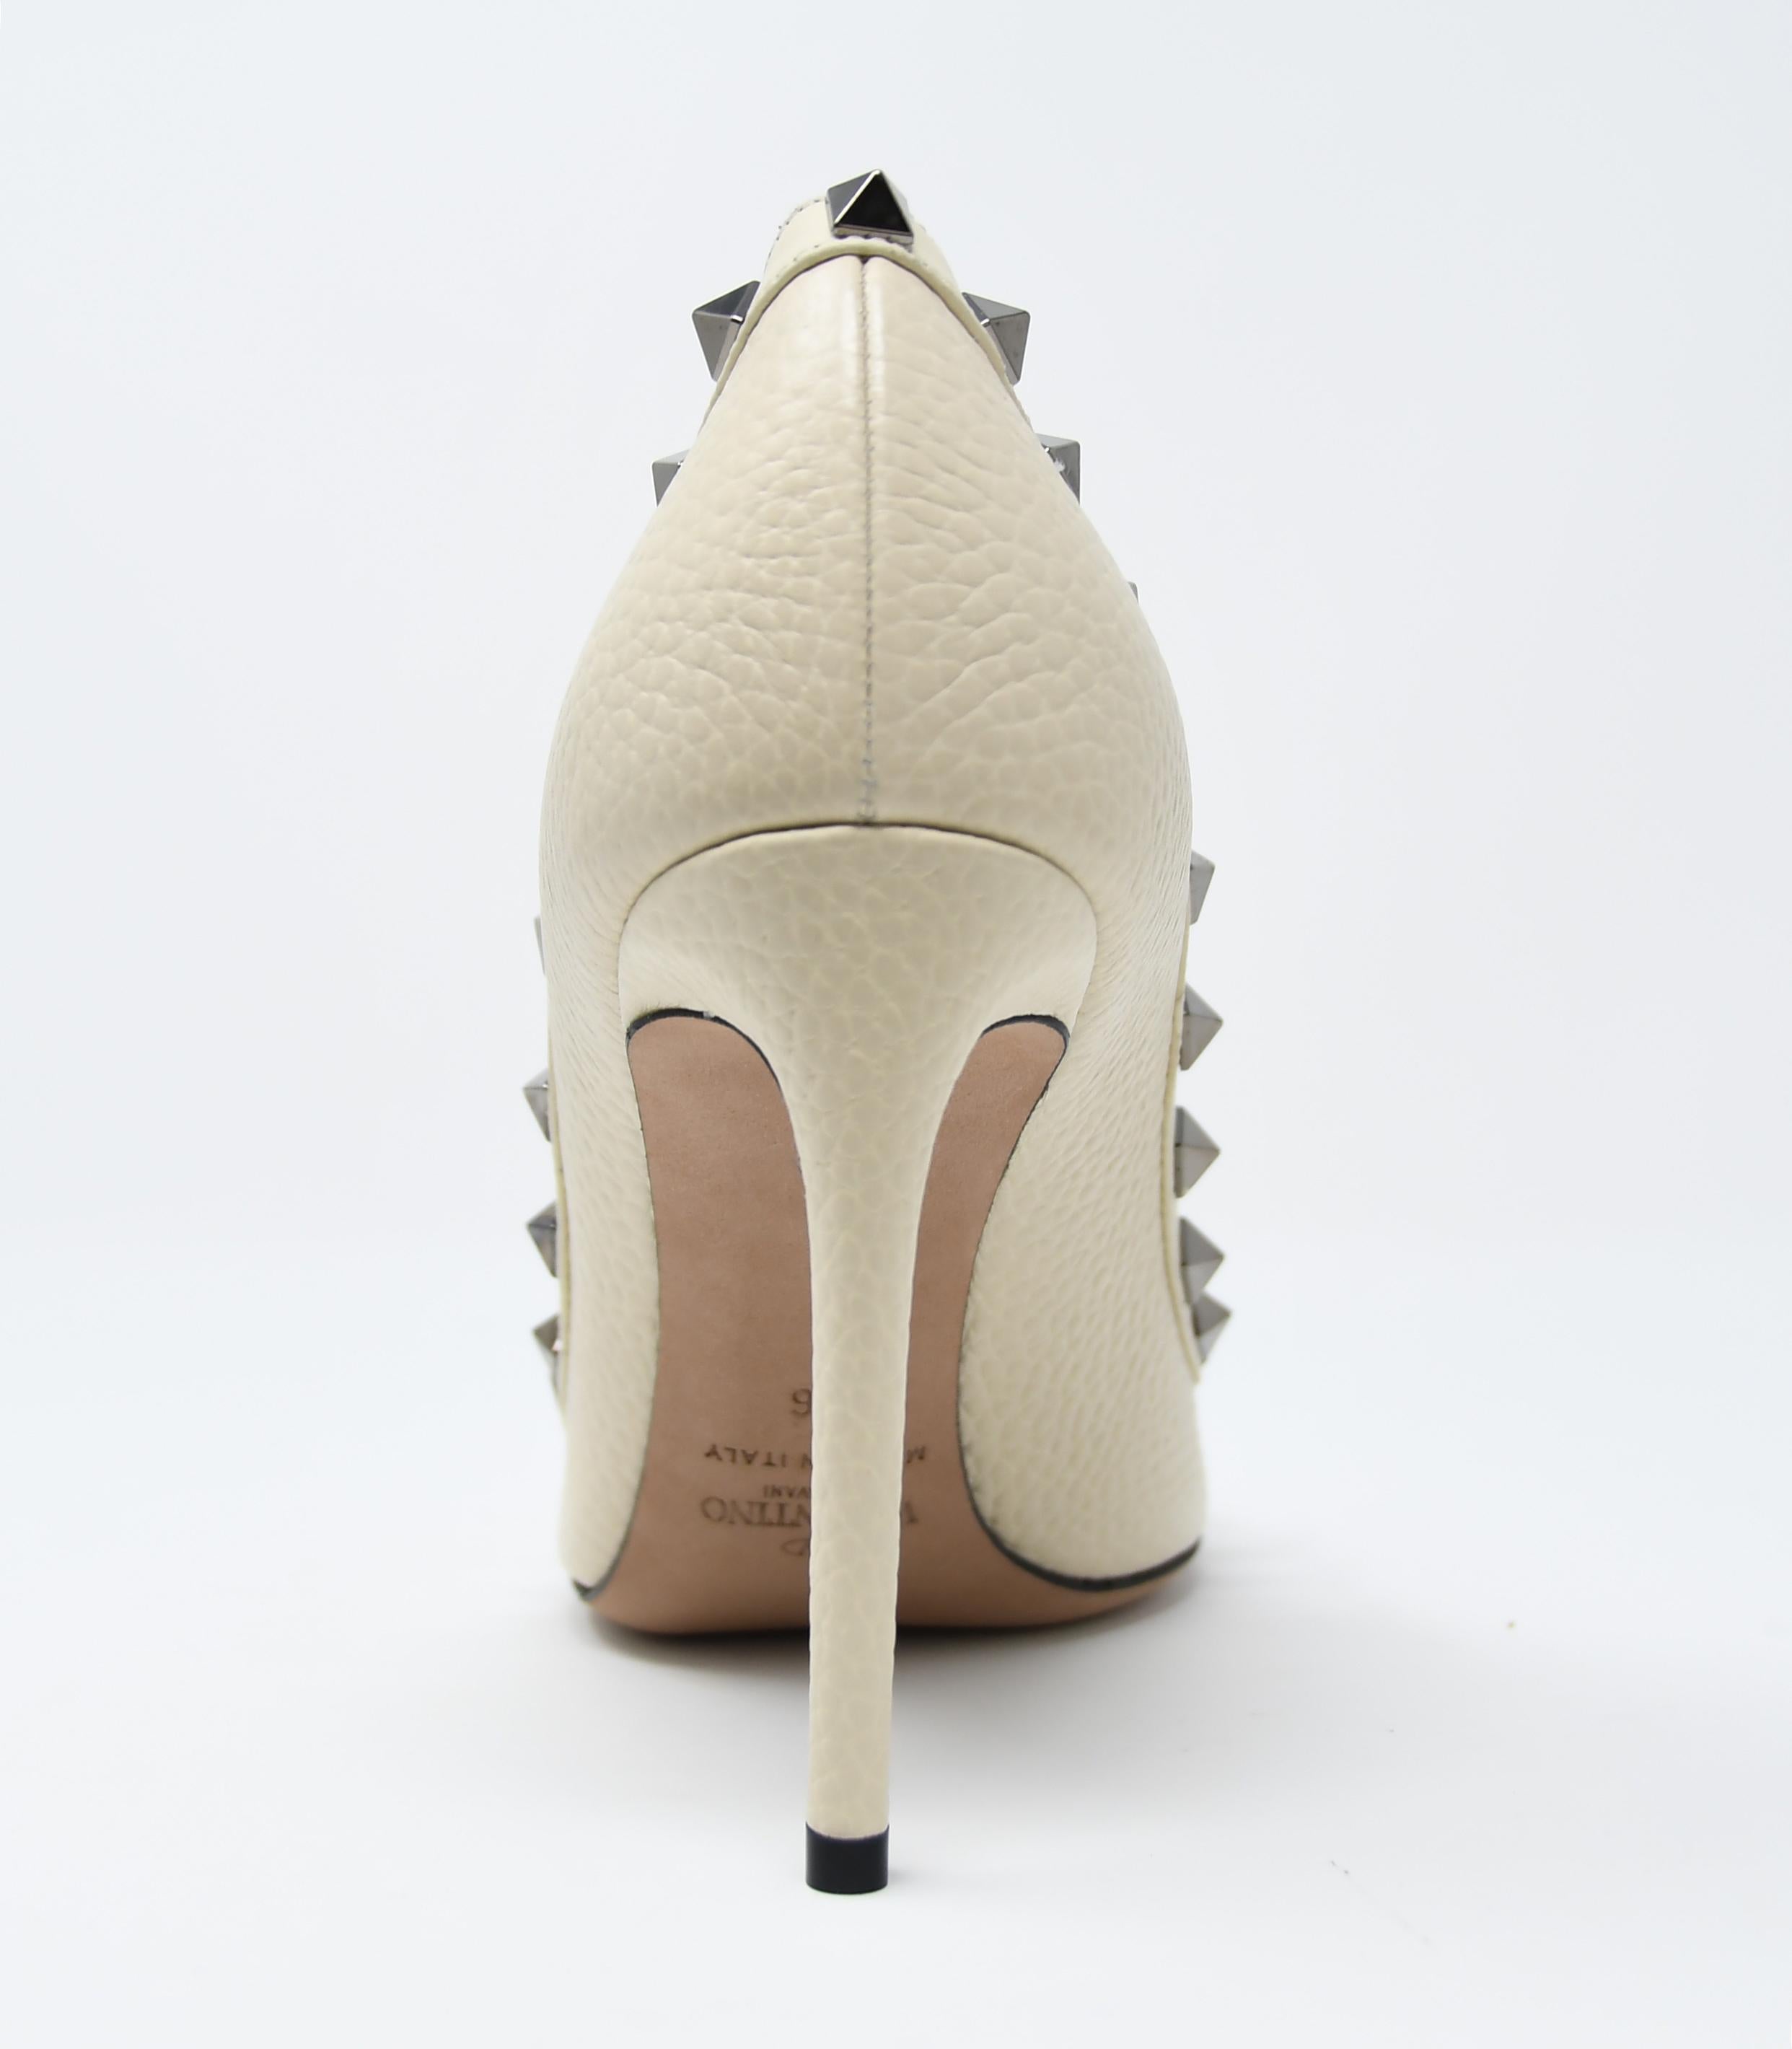 Classic Valentino stiletto in an off white pebbled leather with signature gunmetal rock stud design.  Brand new and comes in original box with dust bag.